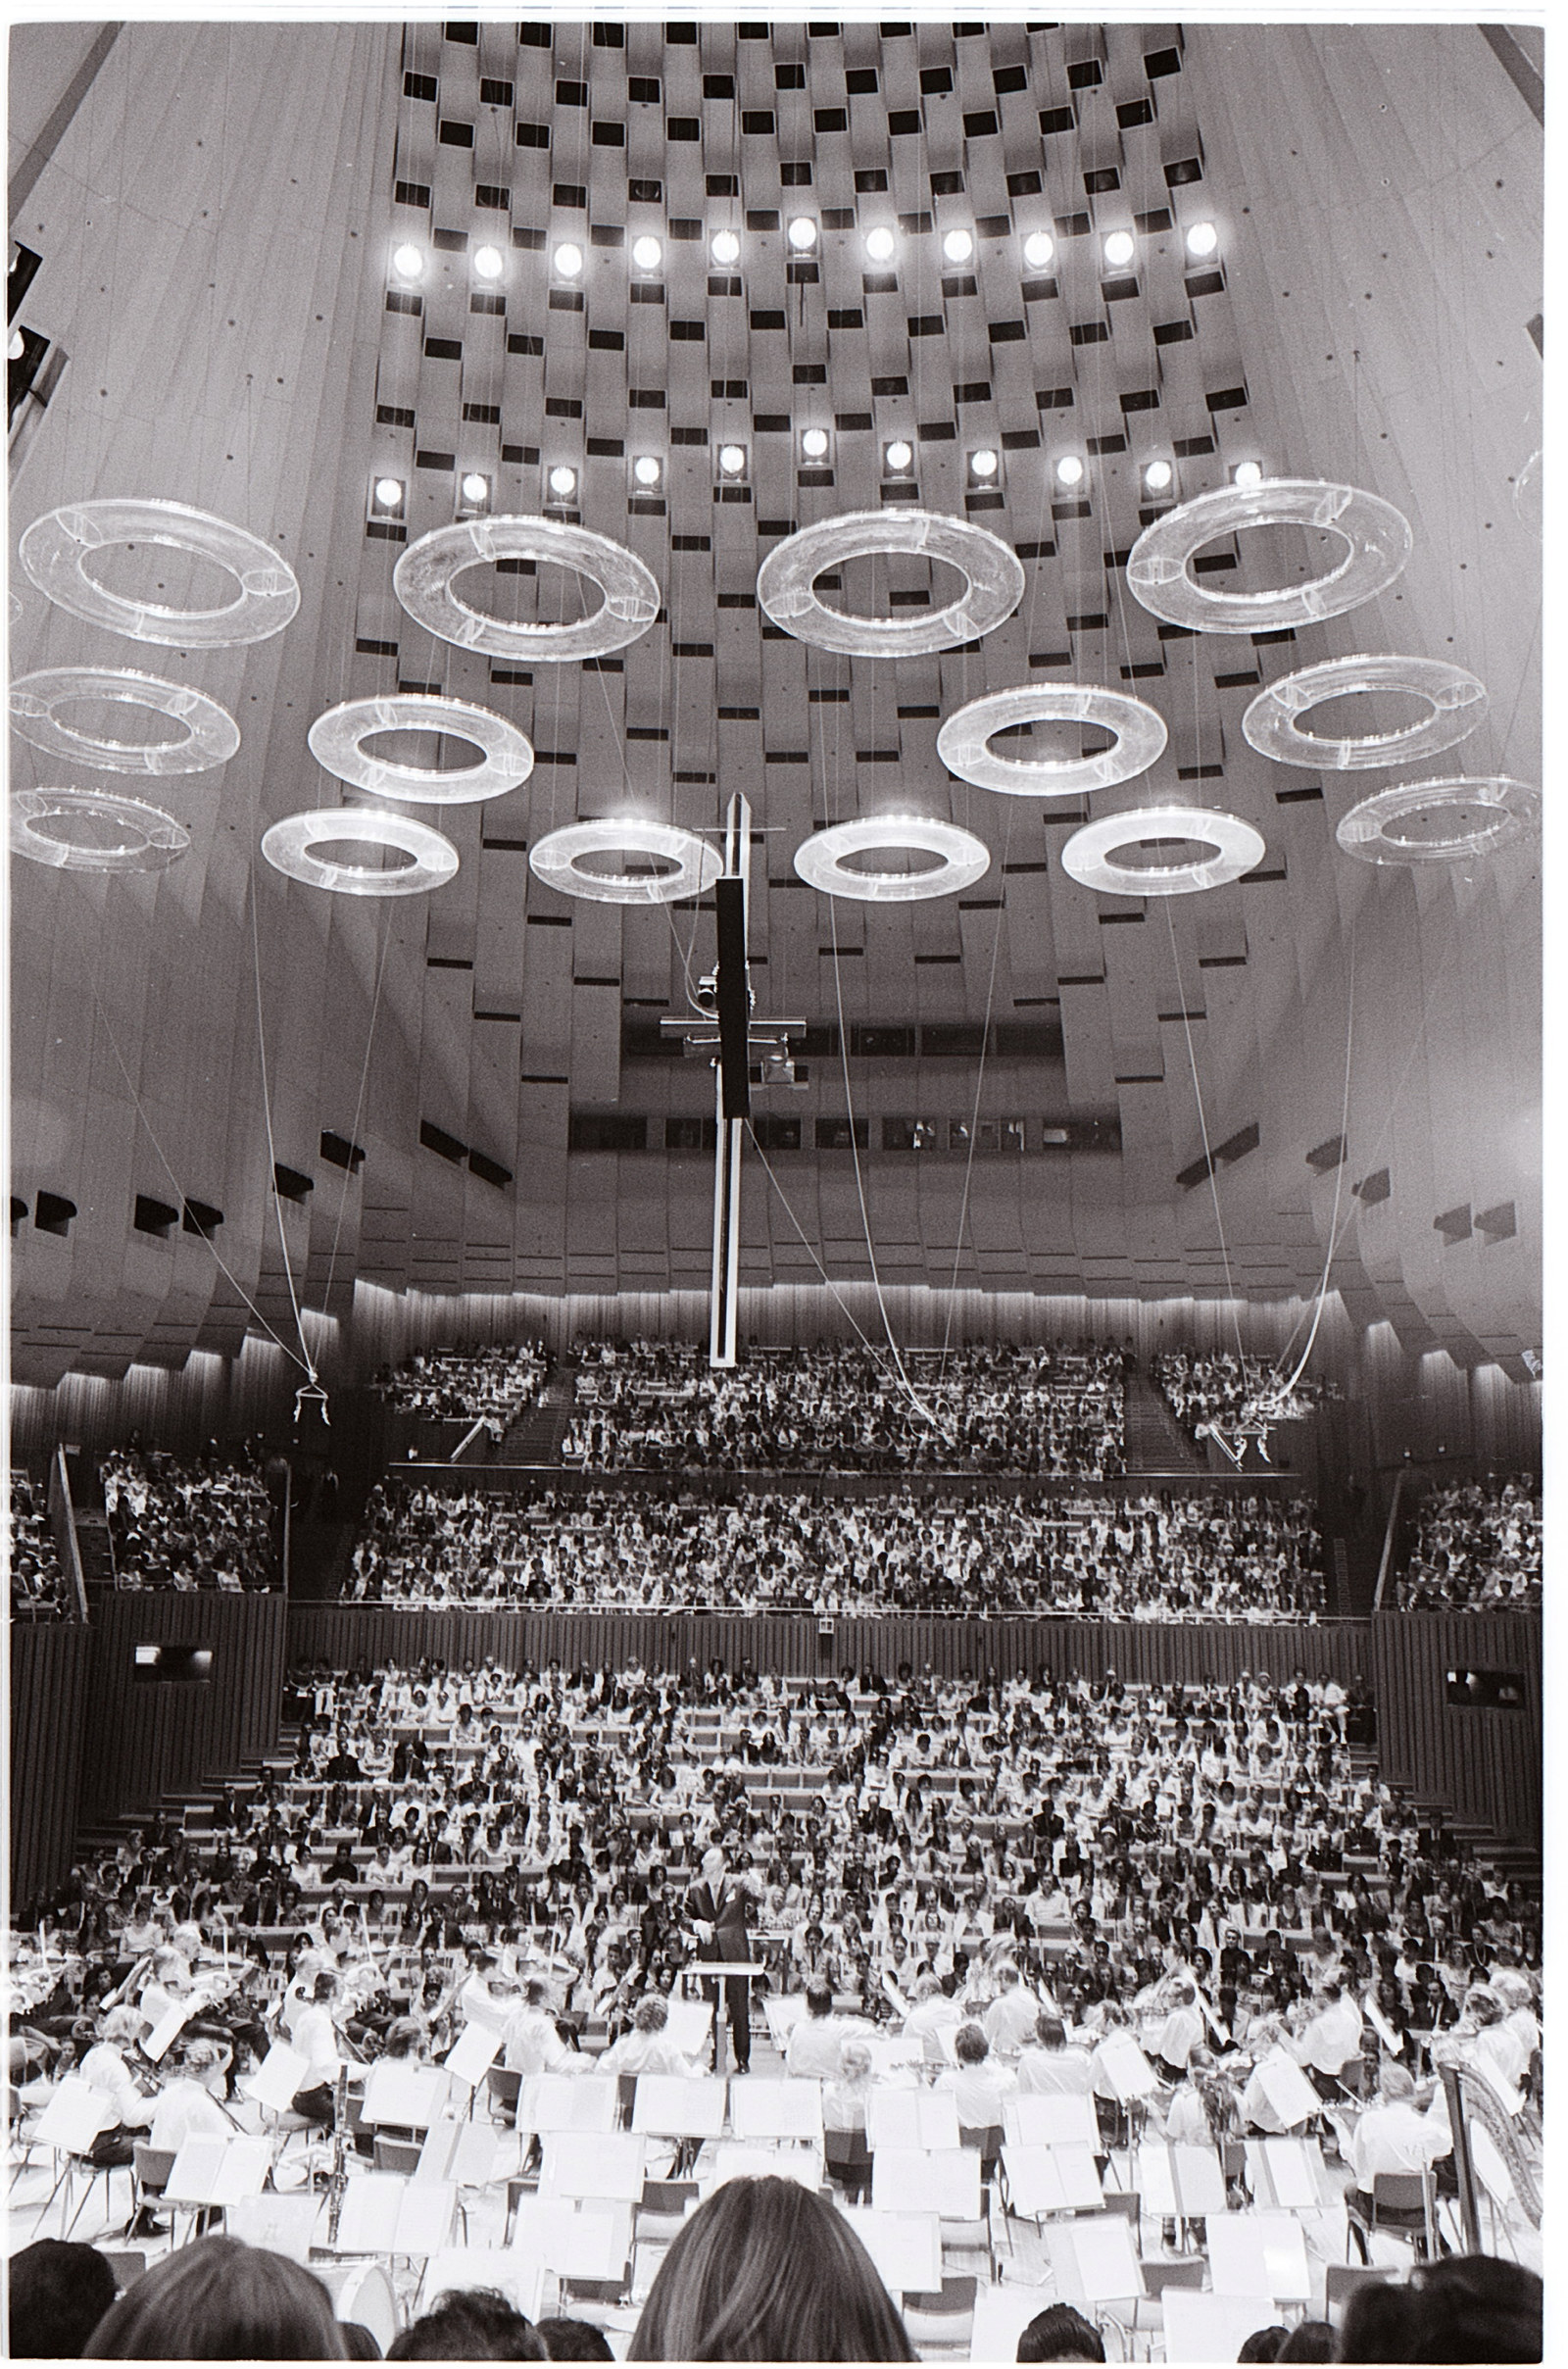 Government Printing Office 3 - 21786 - First live concert in the Sydney Opera House for the purpose of testing the acoustics [music conductors; orchestras] [17-12-72]